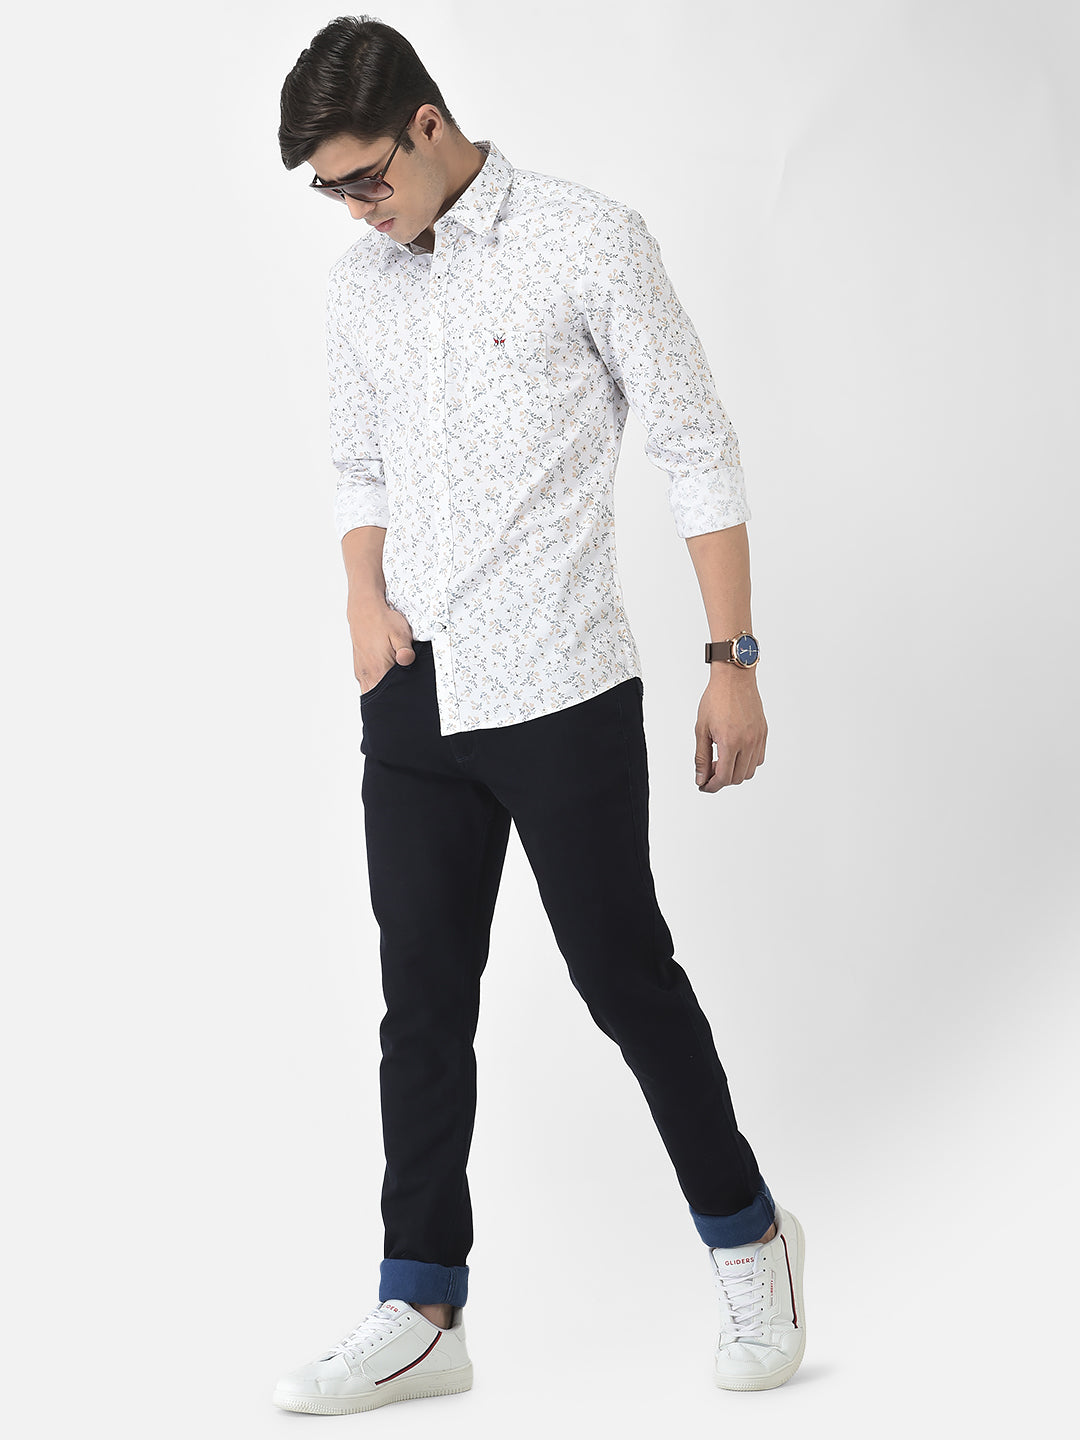  White Floral Shirt in Pure Cotton